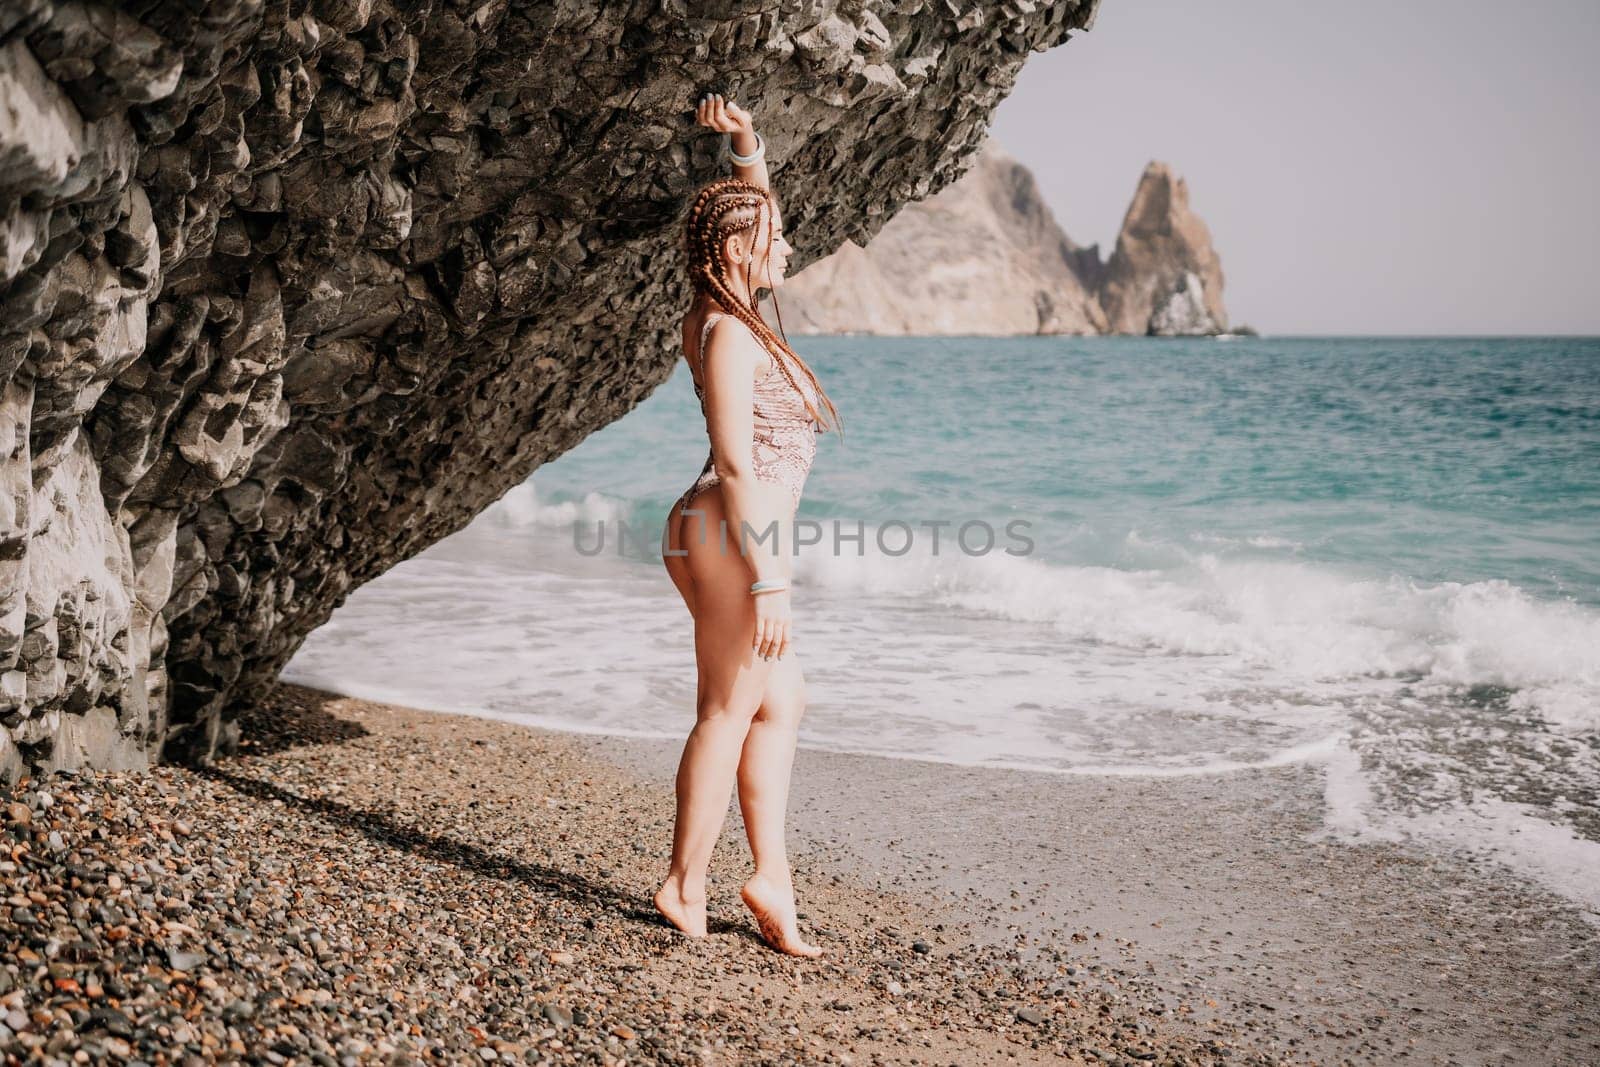 A tourist woman in bikini on beach enjoys the turquoise sea during her summer holiday. Beach vacation. Woman with braids dreadlocks standing with her arms raised near basalt rock enjoying beach ocean by panophotograph